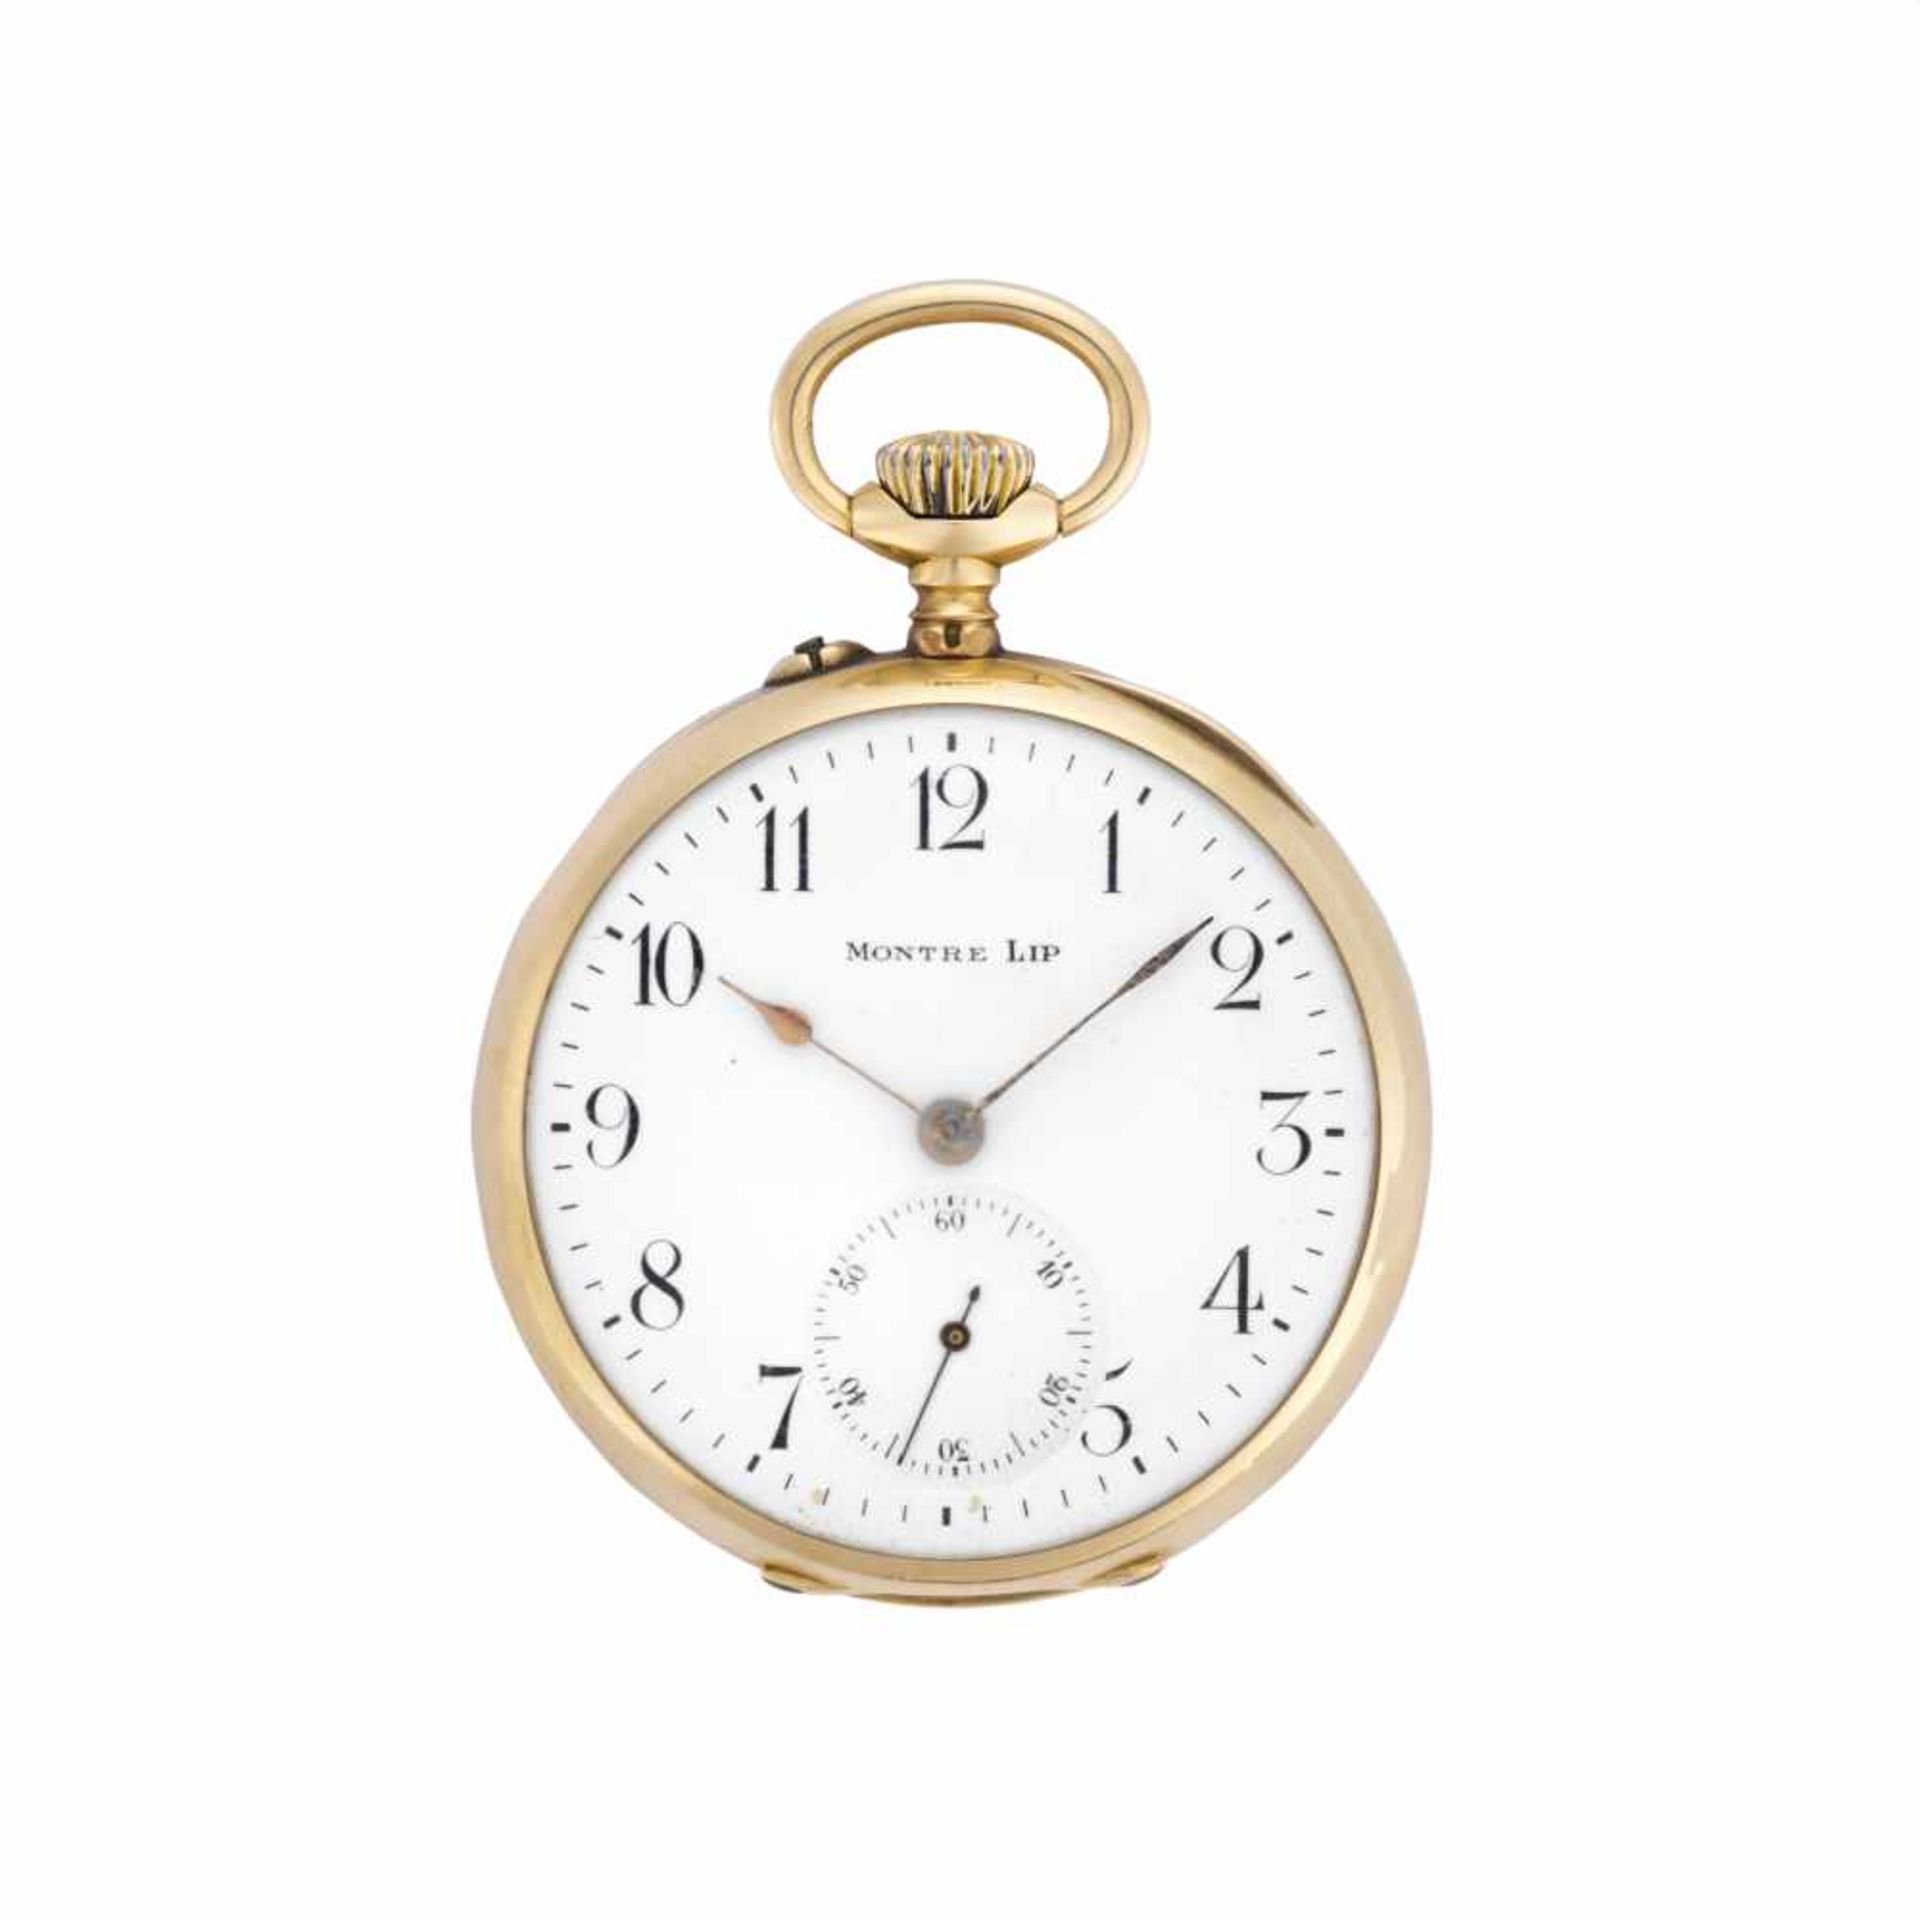 MONTRE LIP 18K gold pocket watchEarly 20th centuryDial and case signedManual wind movementWhite